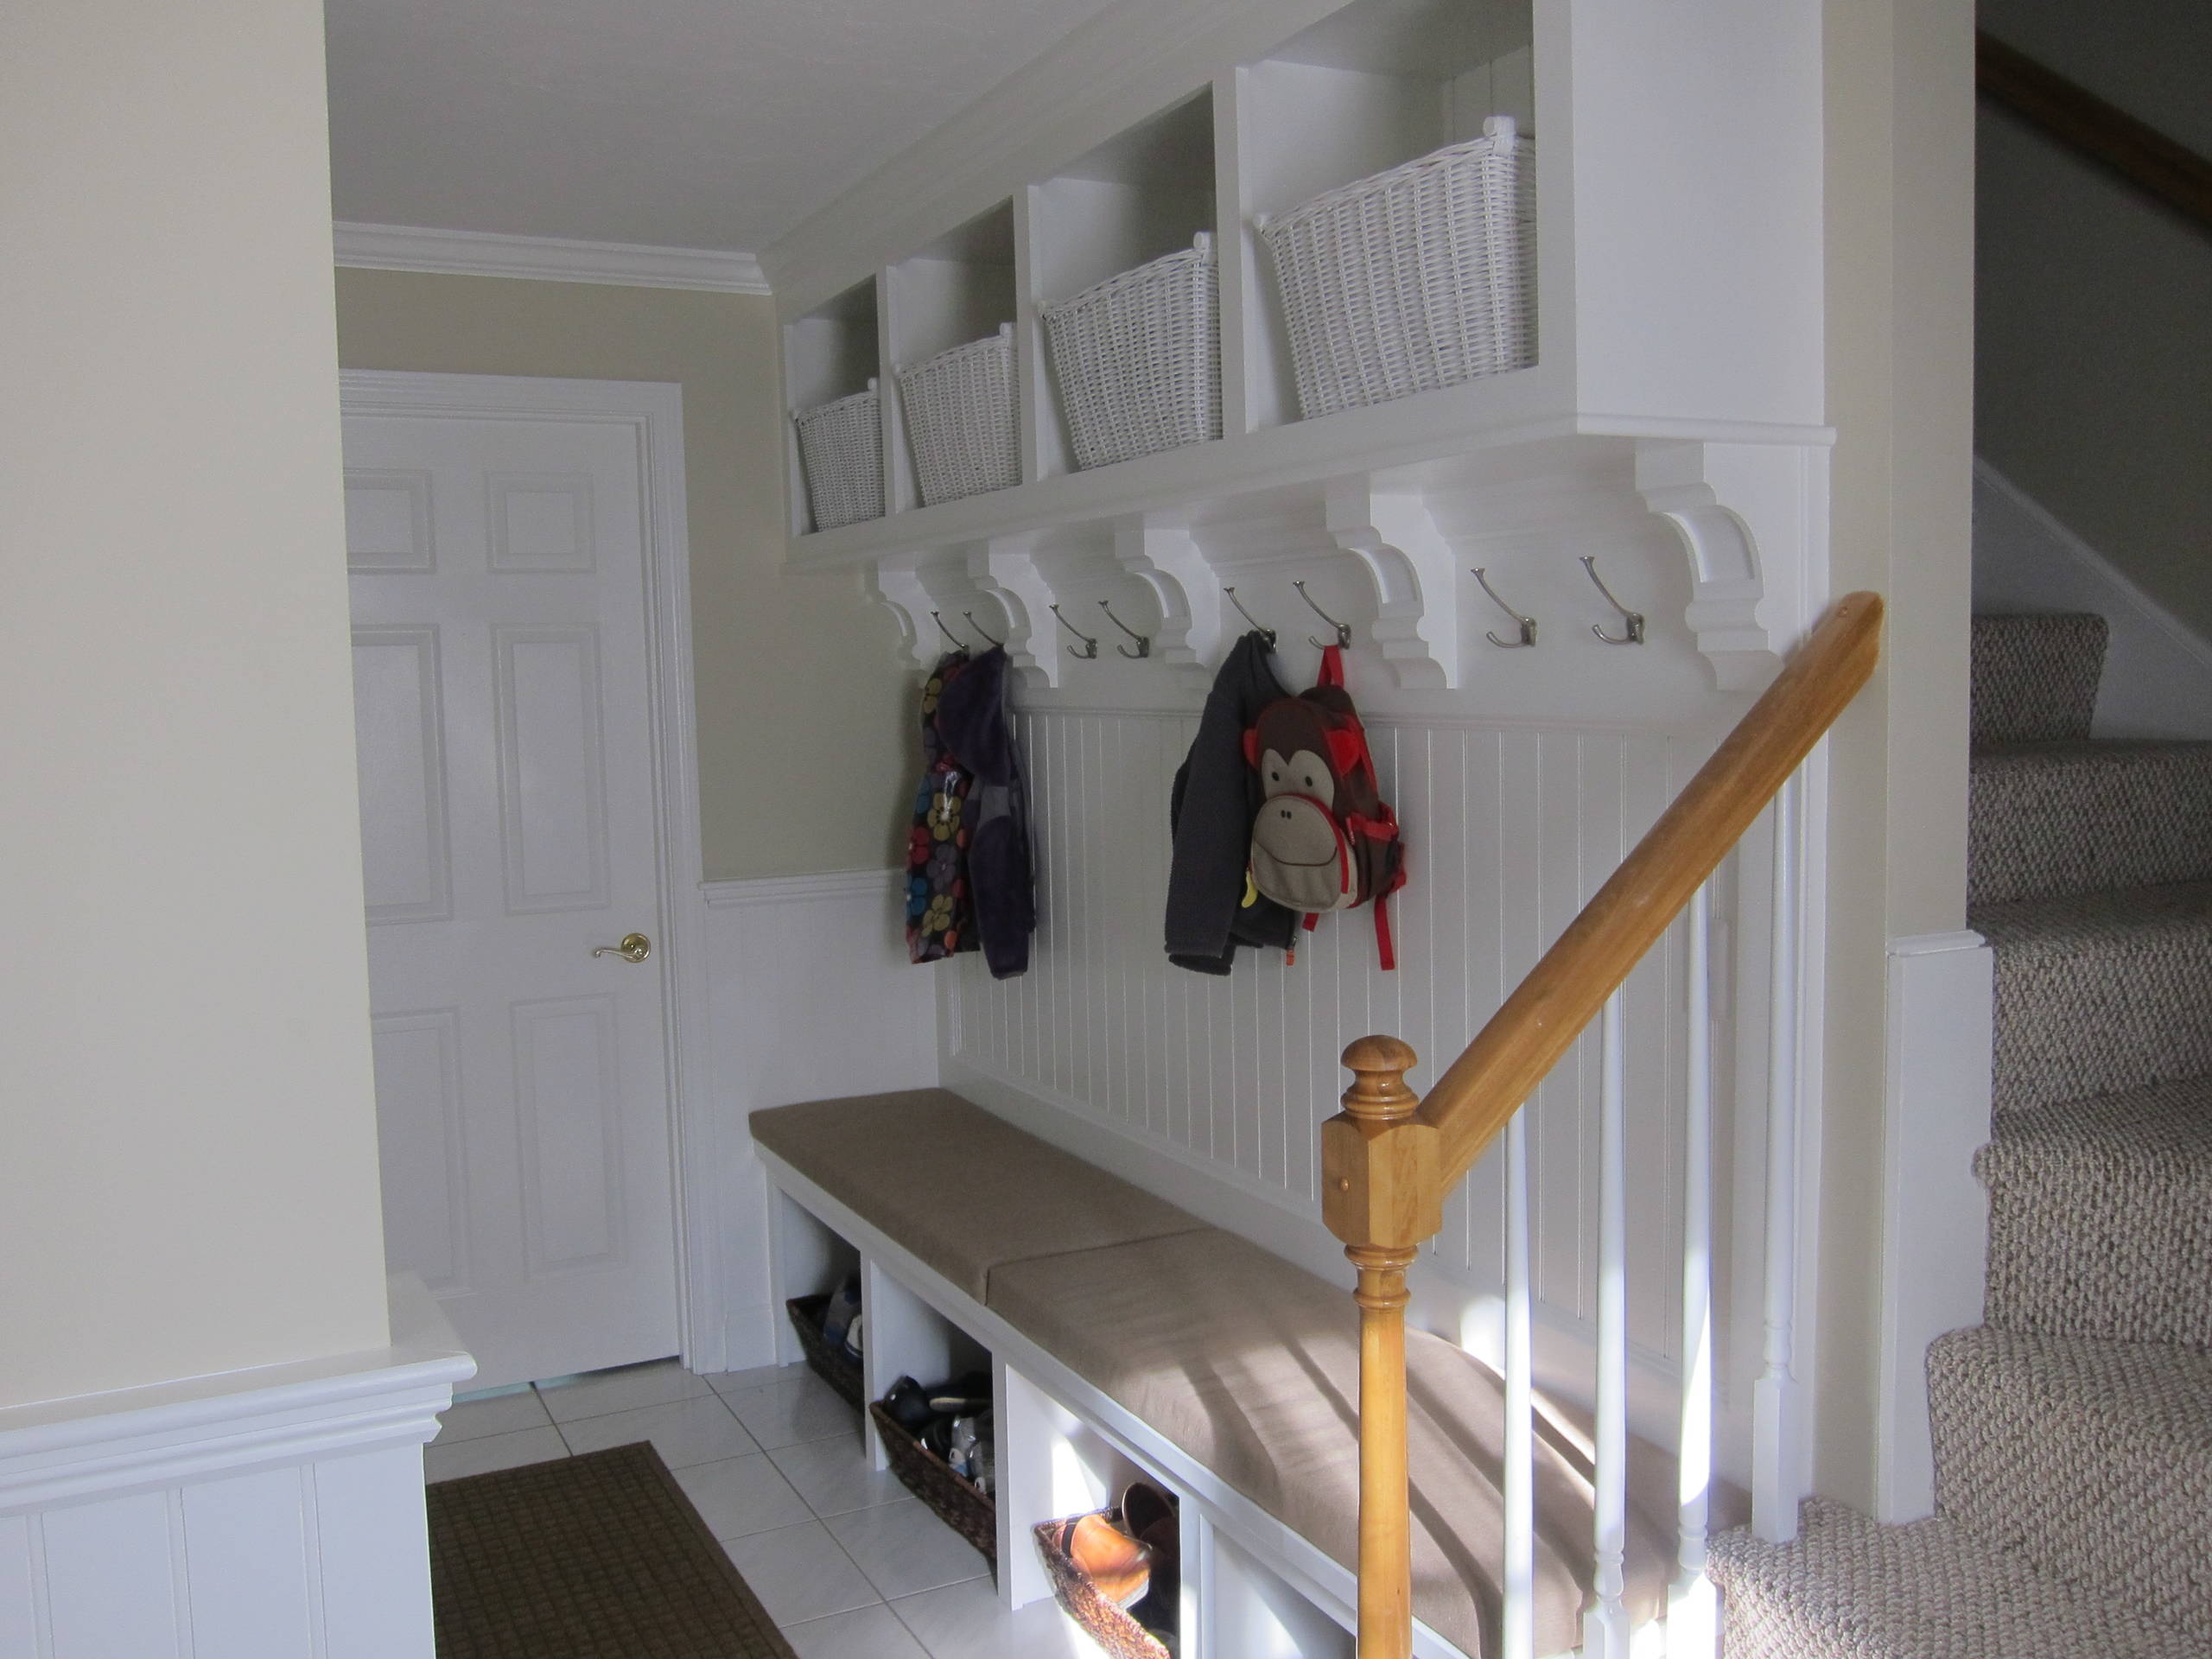 Bench Seats Lockers Cubbies Mudroom Traditional Entry Boston By Custom Home Finish Houzz